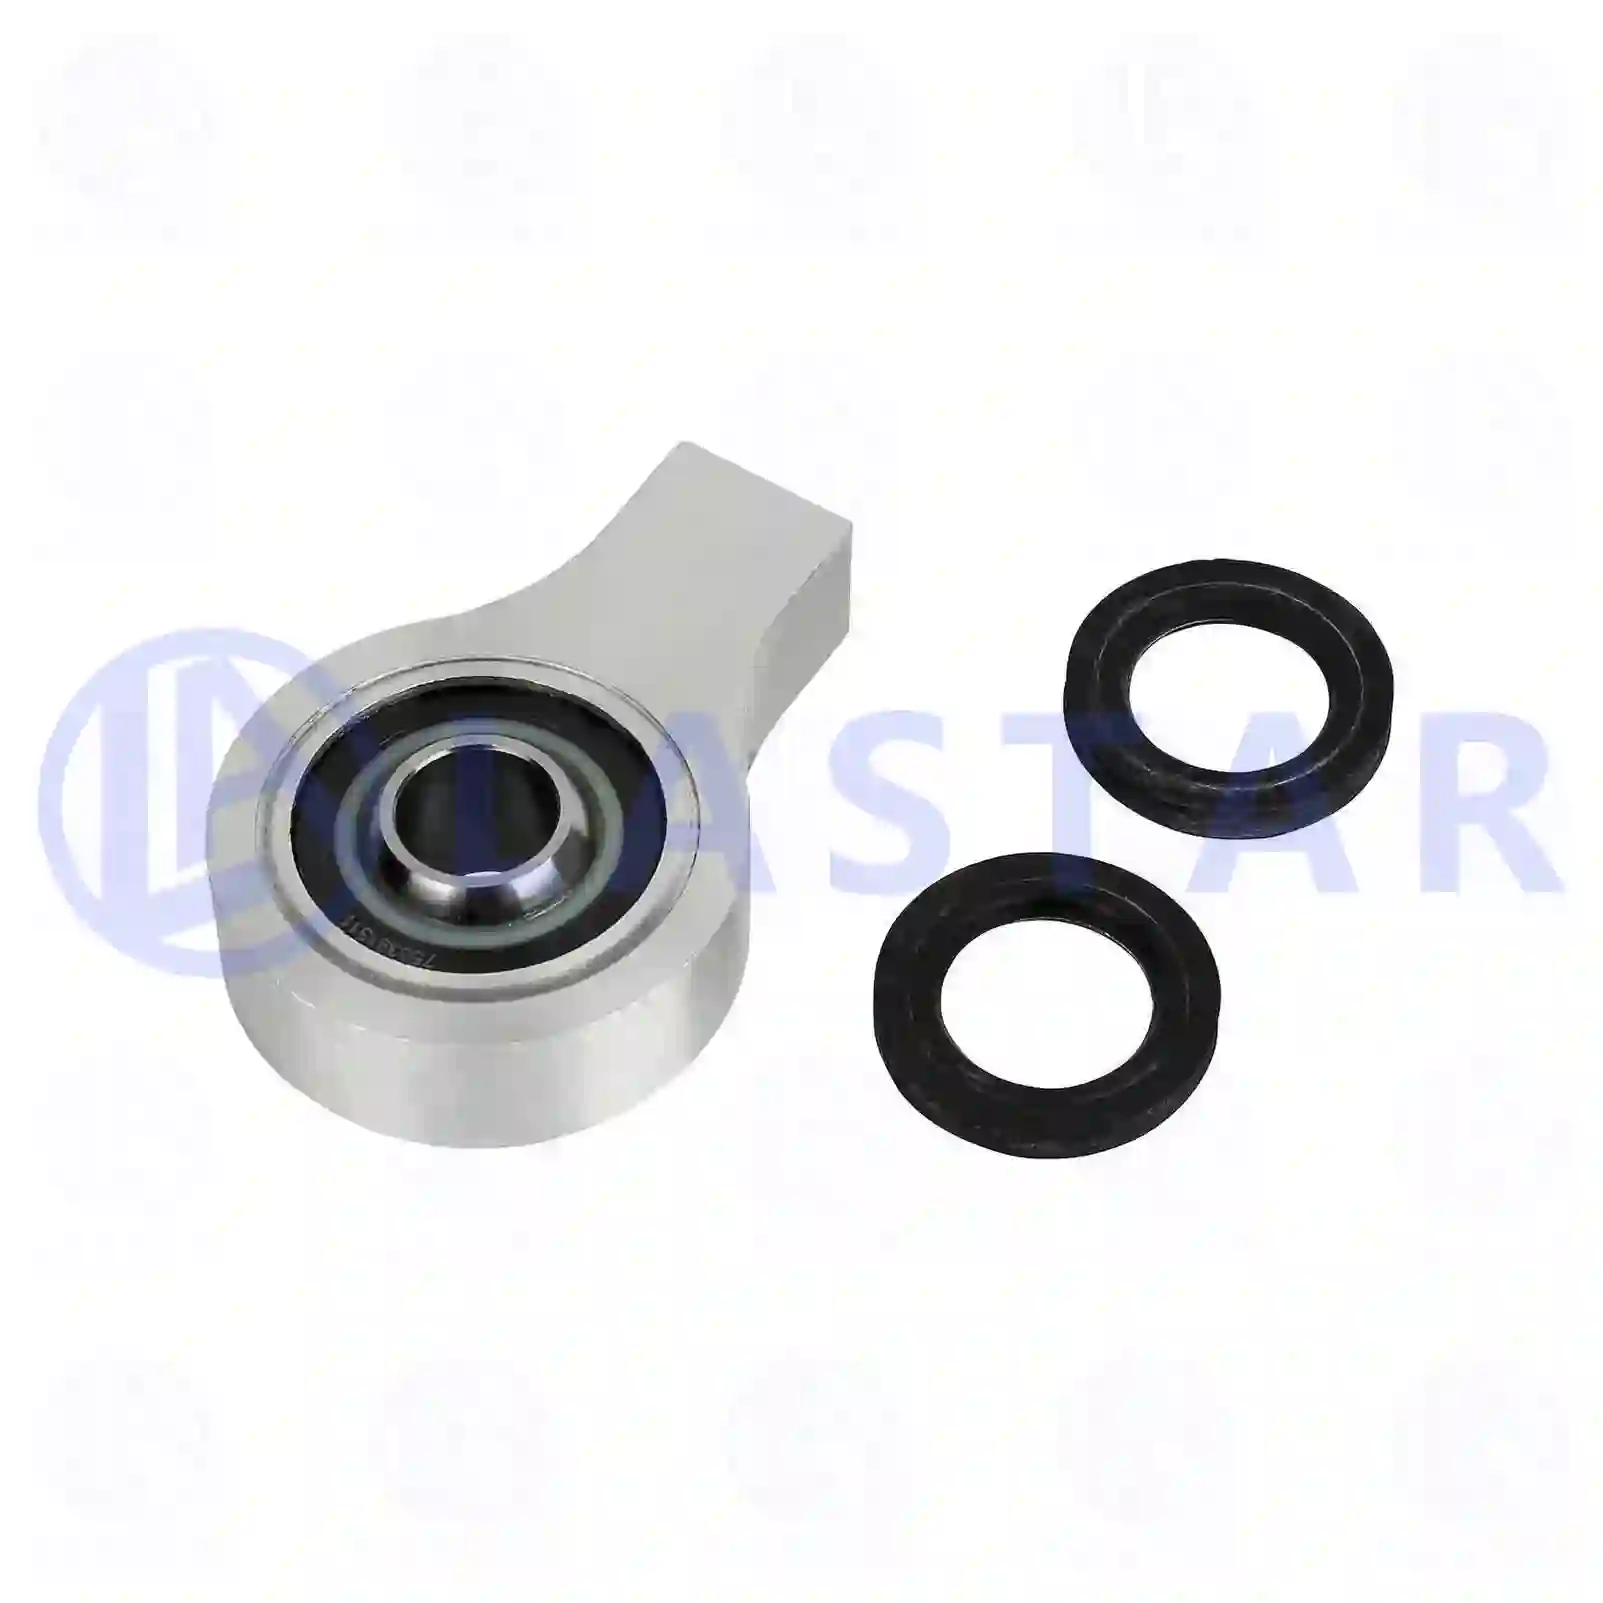 Bearing joint, complete with seal rings, 77736100, 2171712, ZG40855-0008, ||  77736100 Lastar Spare Part | Truck Spare Parts, Auotomotive Spare Parts Bearing joint, complete with seal rings, 77736100, 2171712, ZG40855-0008, ||  77736100 Lastar Spare Part | Truck Spare Parts, Auotomotive Spare Parts